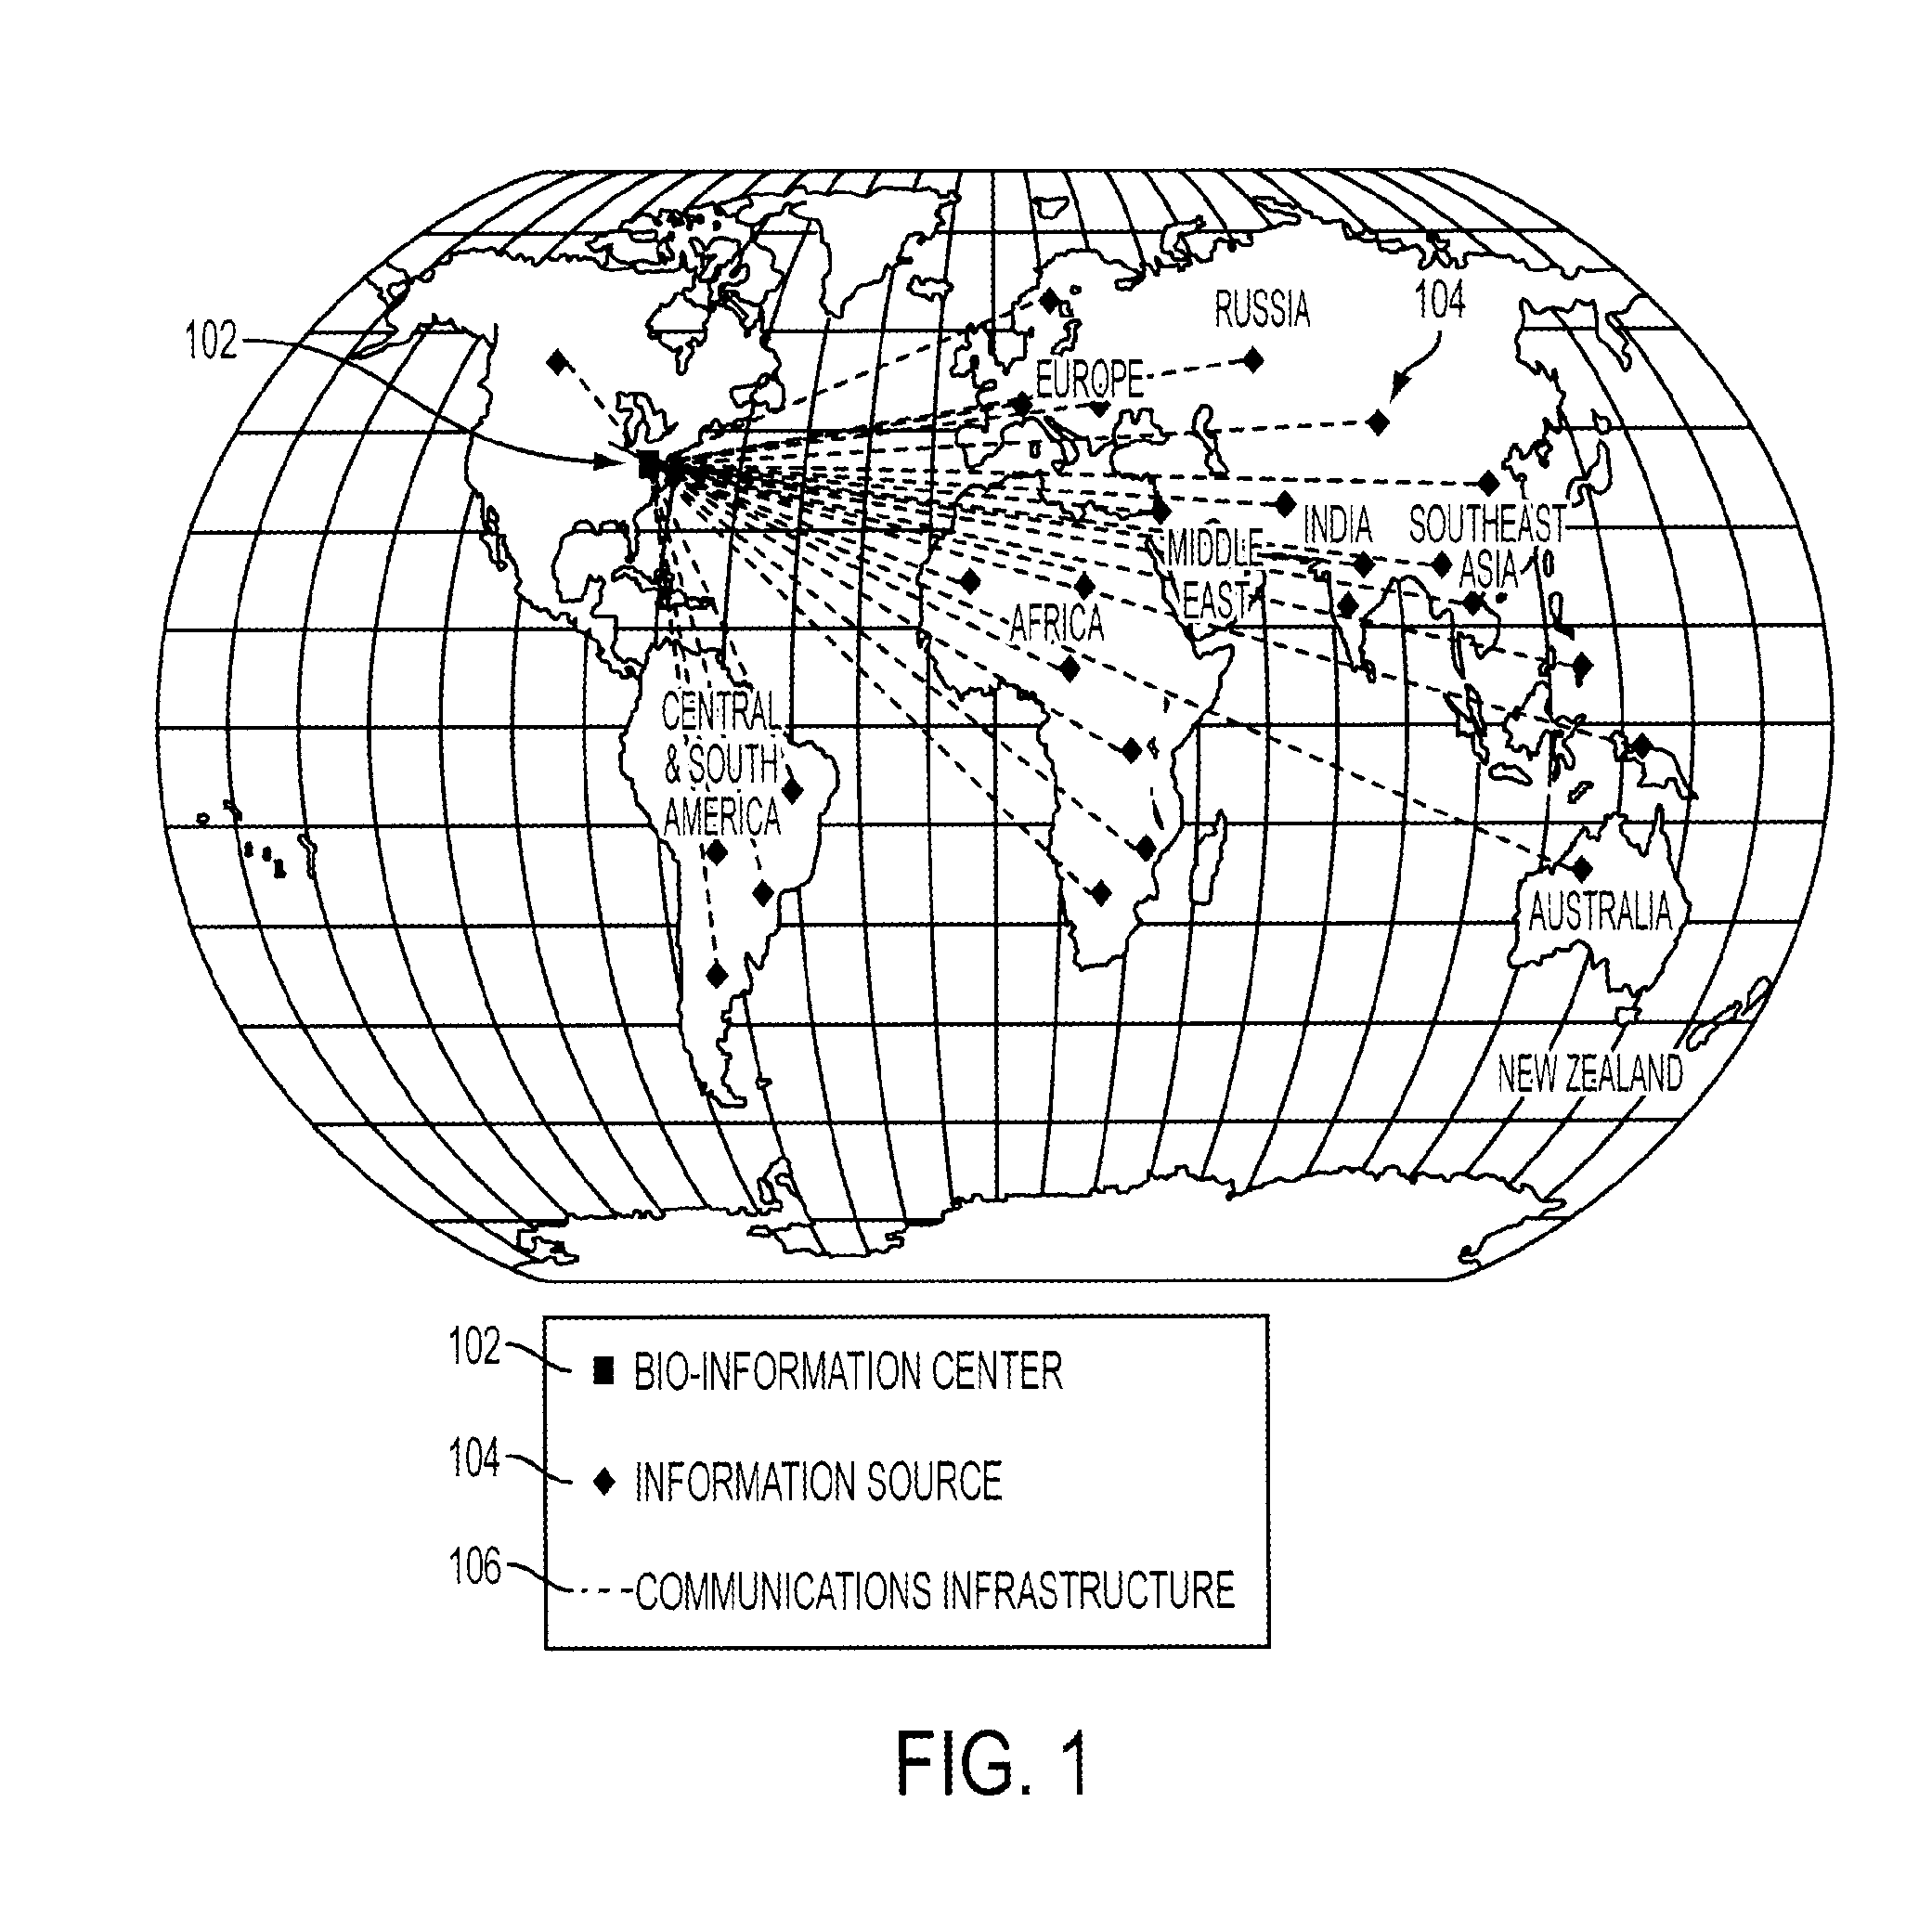 System and method for detecting, collecting, analyzing, and communicating event-related information